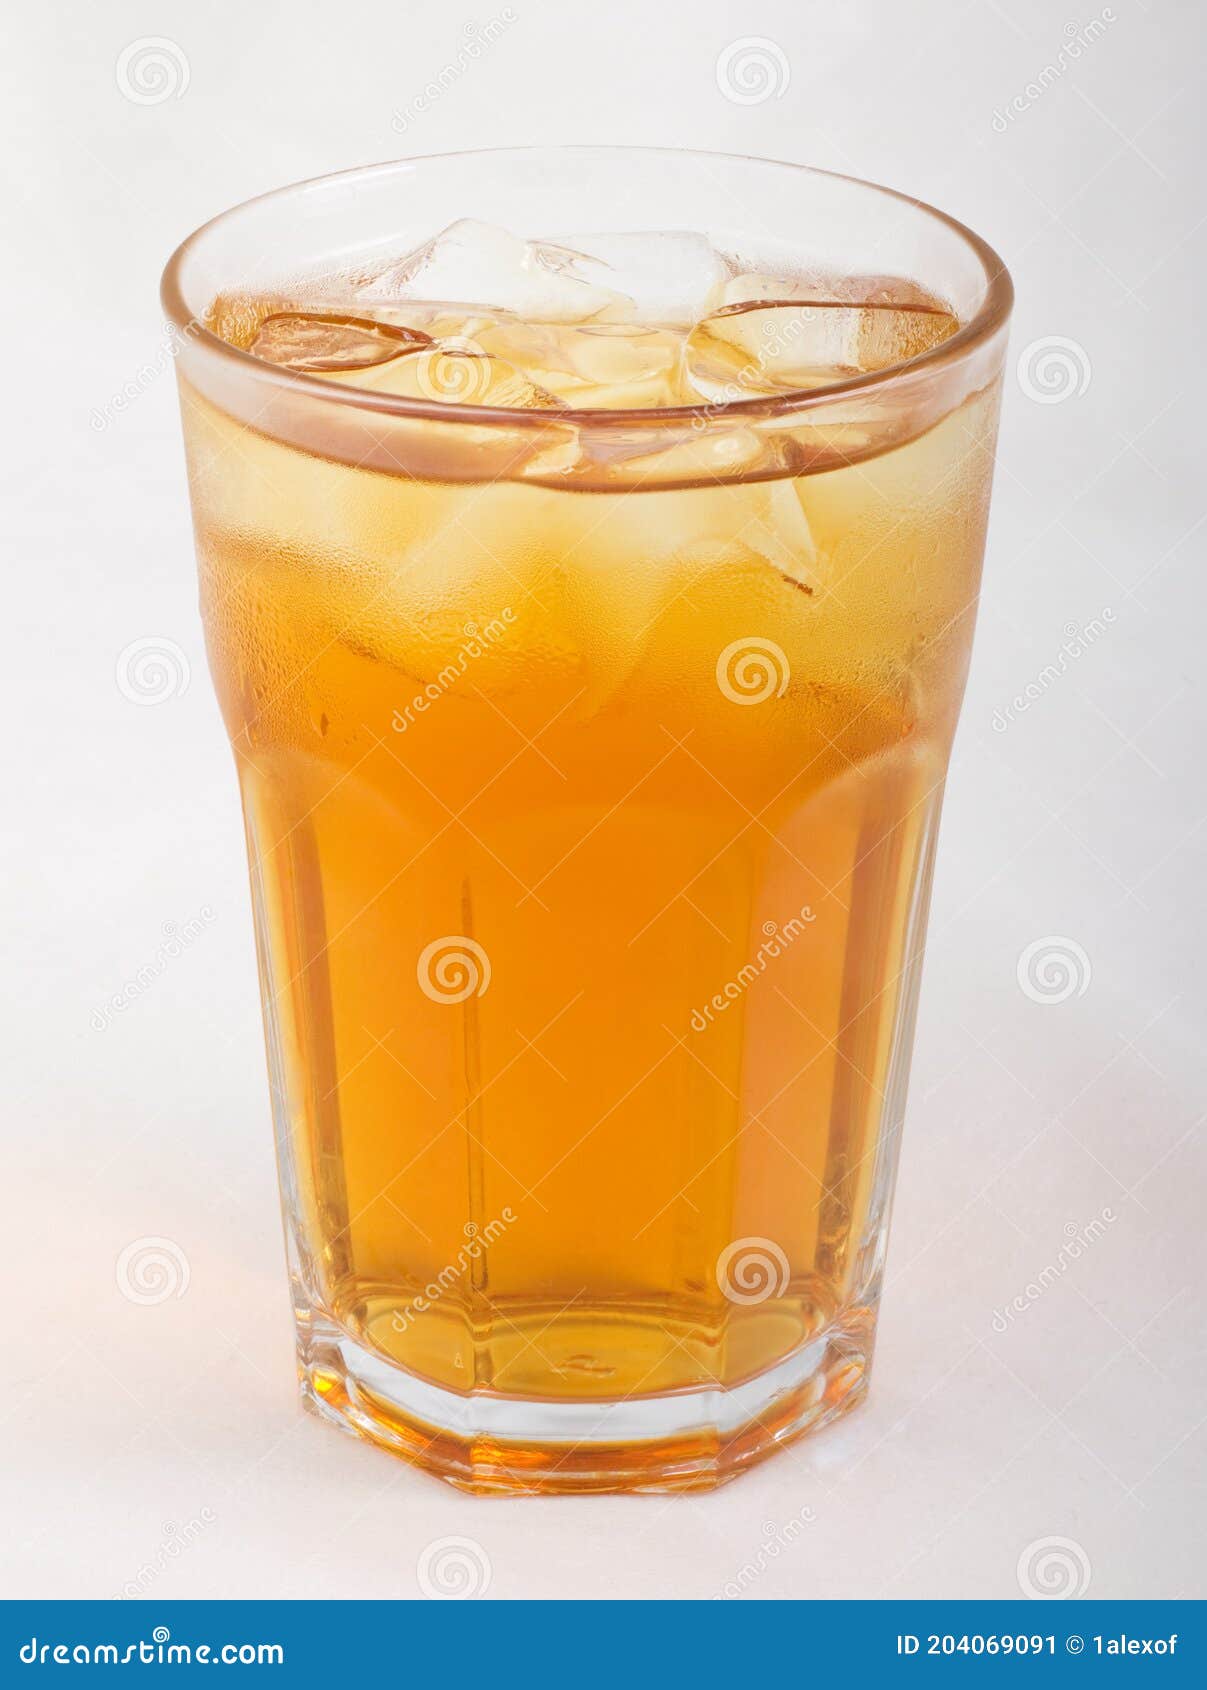 Apple Juice With Ice Cubes In A Glass Cup Stock Image Image Of Bottle Apple 204069091